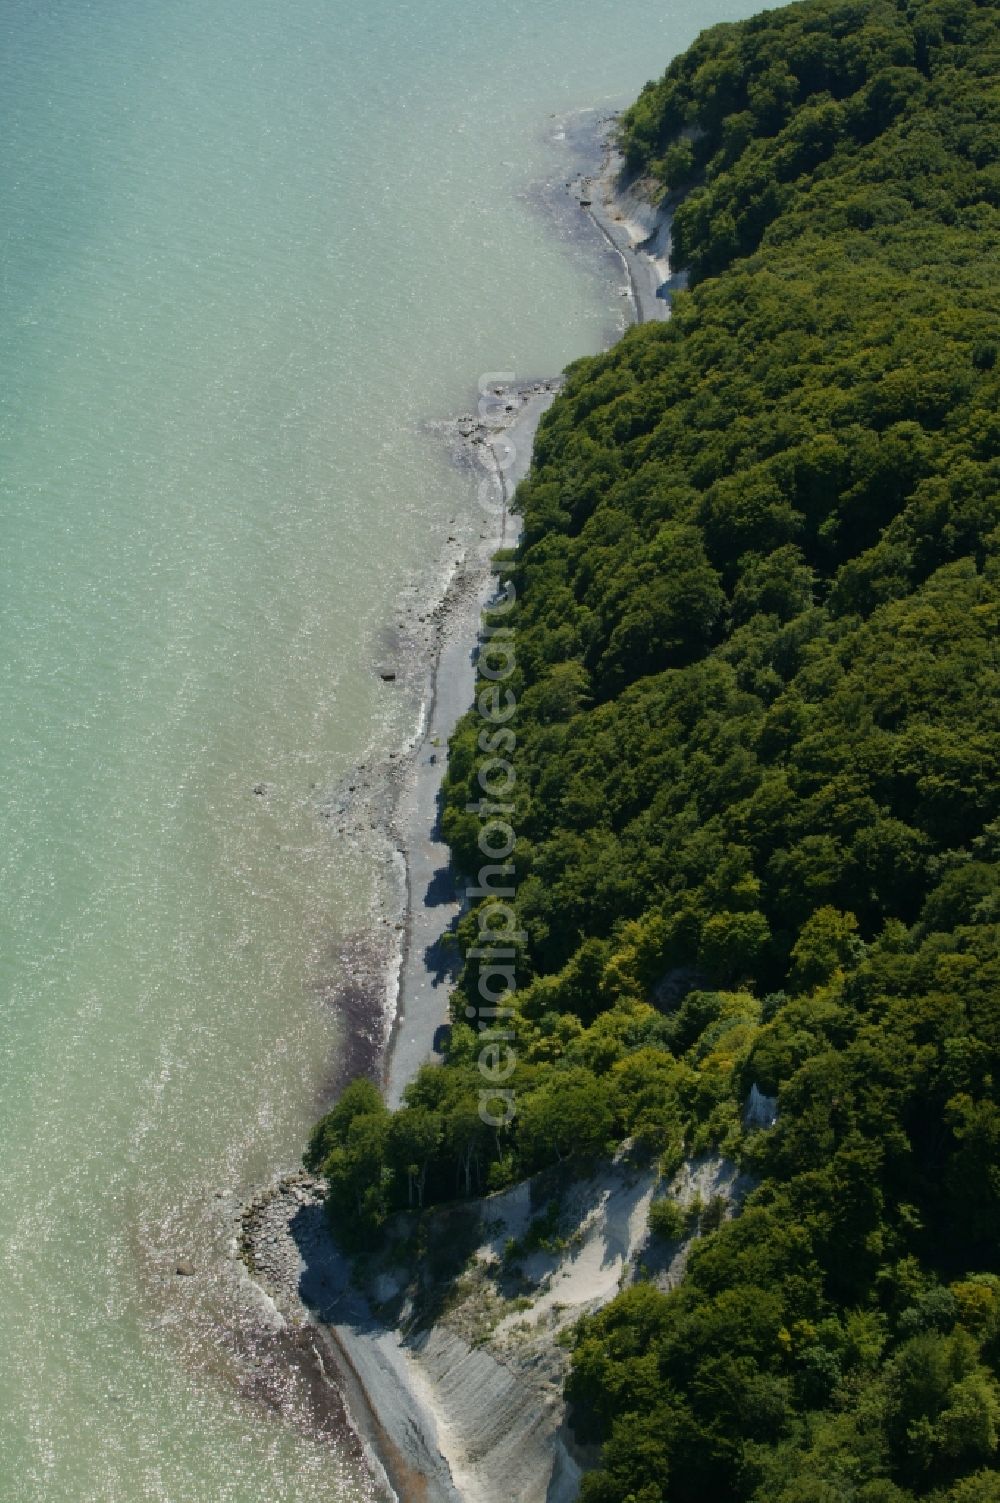 Aerial image Sassnitz - The chalk cliffs in Sassnitz in Mecklenburg-Vorpommern belong to the Jasmund National Park on the island of Ruegen. The beech forests on the ridge Stubnitz are UNESCO World Heritage Site. The old beech stand up to the edge of the cliff. Clear waters of the Baltic Sea lapped the chalk cliffs that consistently change their shape by erosion